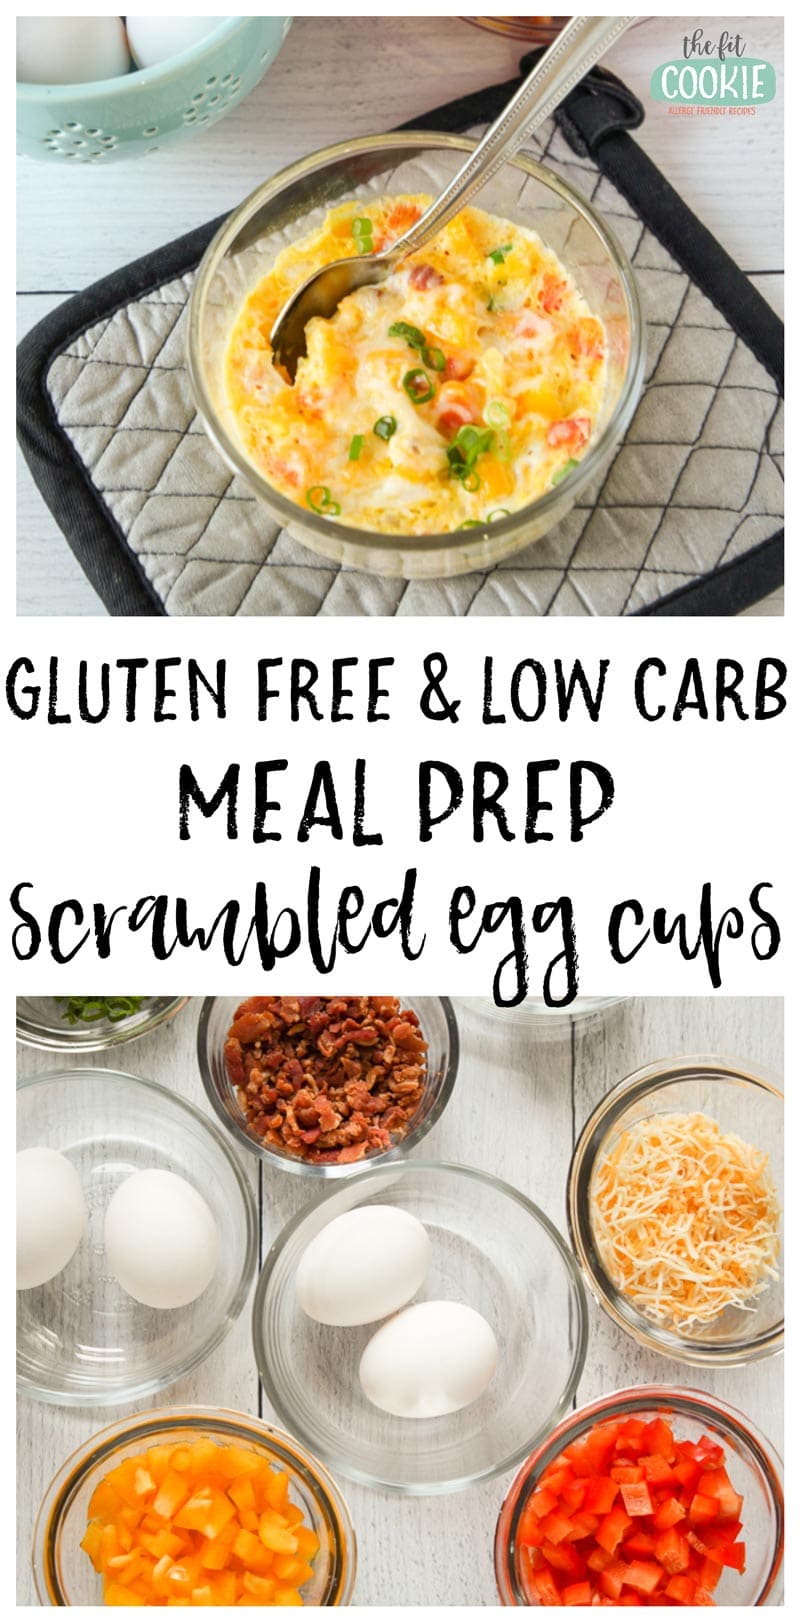 image collage of gluten free and low carb scrambled egg cups in glass bowls